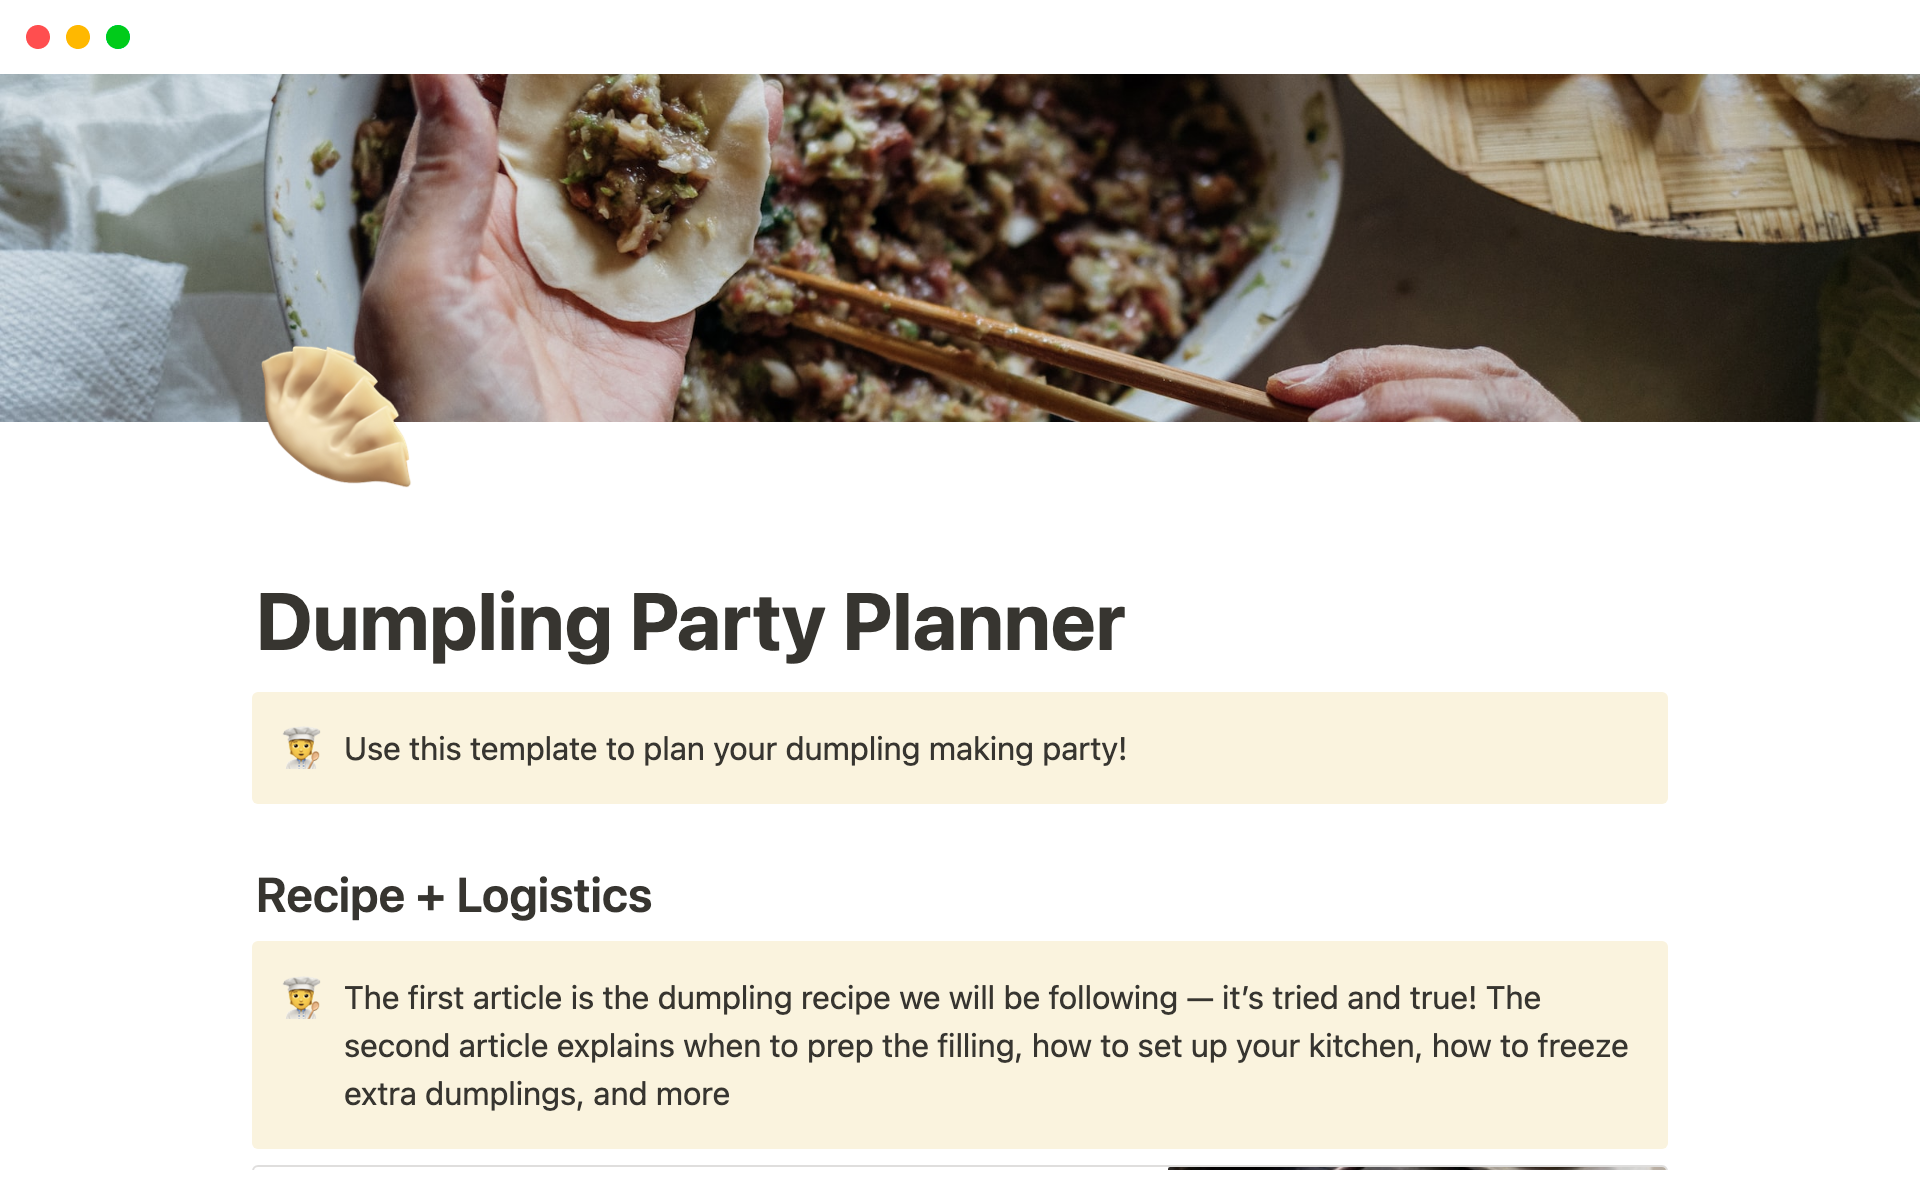 Simple guide to hosting a dumpling making and eating party